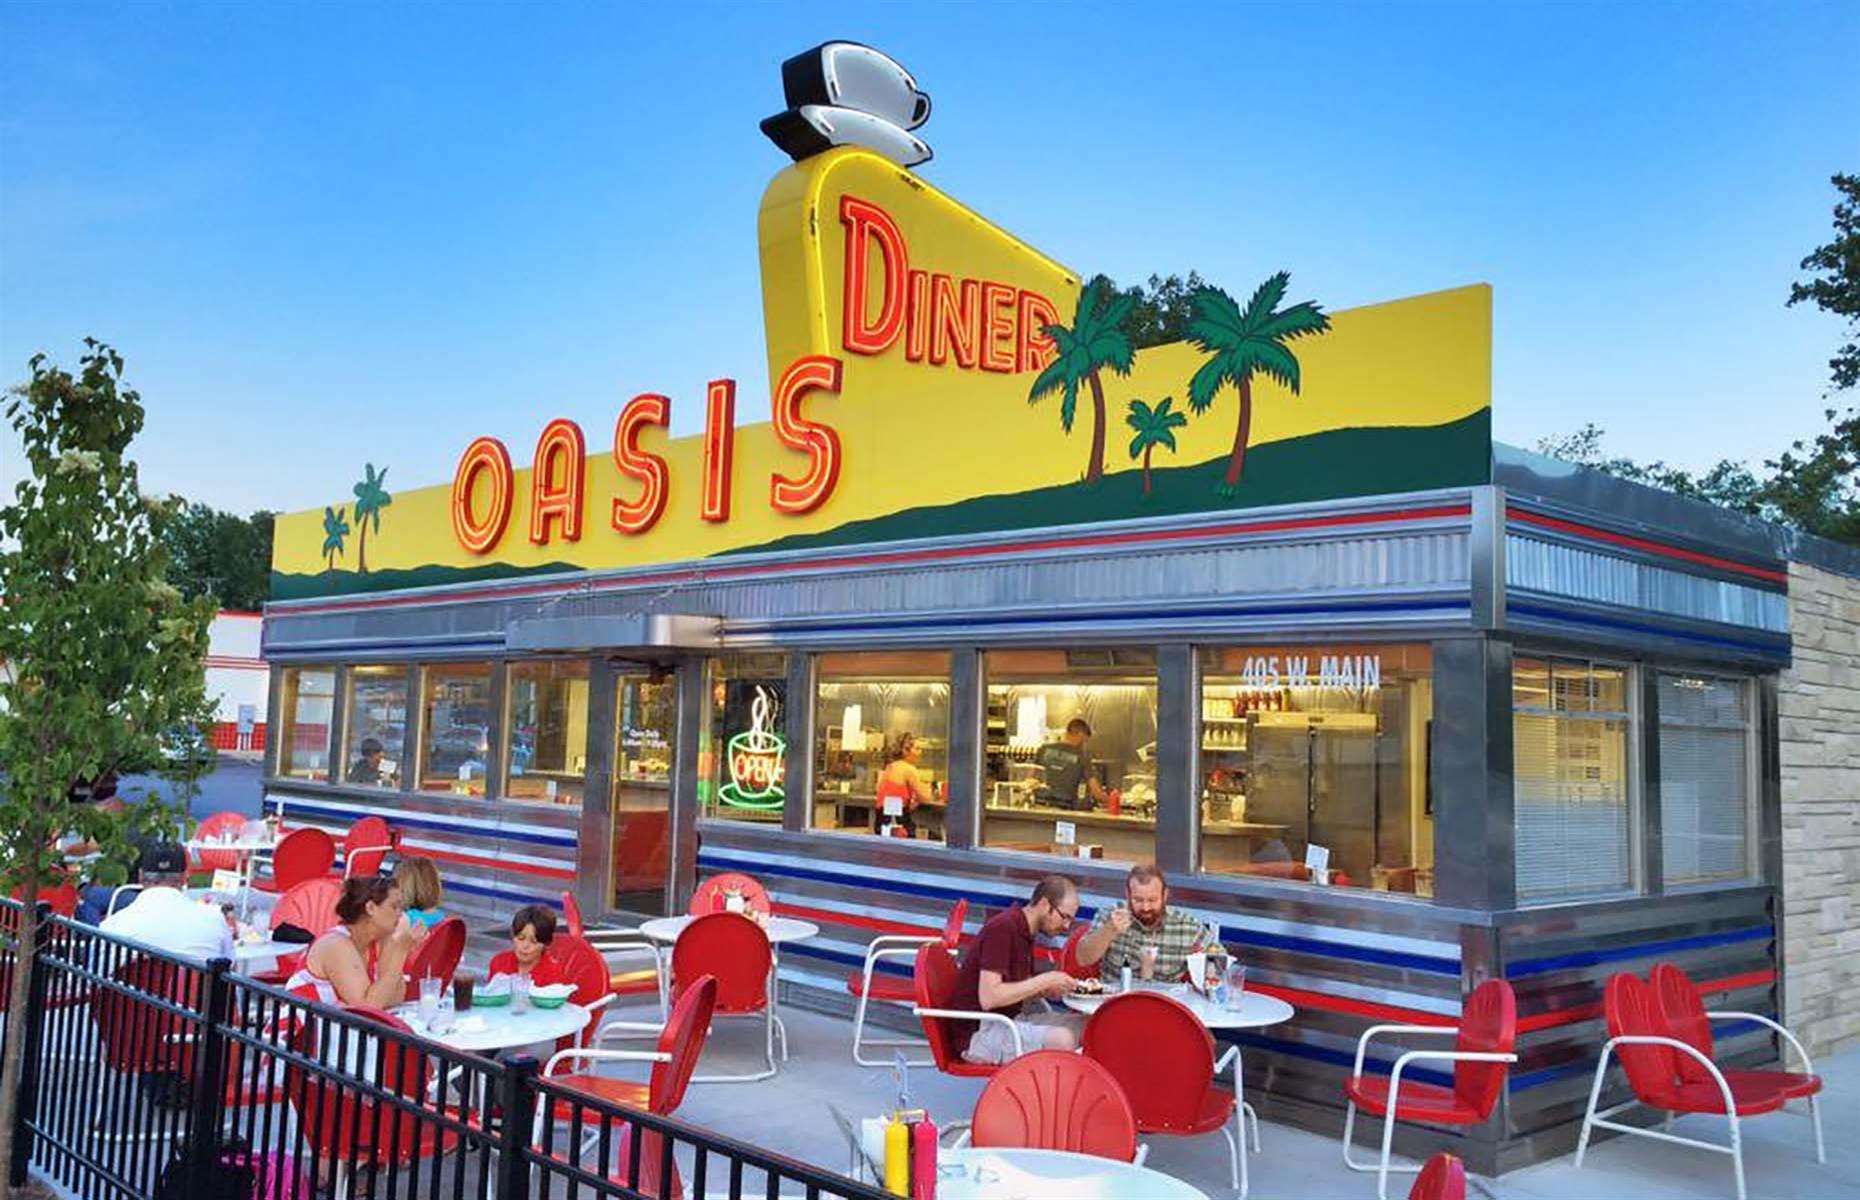 <p>This fun and funky diner just west of Indianapolis is great if you love vintage things. The stainless-steel dining car dates <a href="http://www.oasisdiner.com/oasis-diner-history/">back to the 1950s</a> and has a collection of old-school lunchboxes including Pac Man, Barbie and Mickey Mouse. All visitors have a fantastic time and <a href="https://www.yelp.com/biz/oasis-diner-plainfield">love The Oasis Burger</a> with two beef patties, pulled pork, bacon, barbecue sauce, coleslaw, pickles and Cheddar. Indoor and outdoor seating is available.</p>  <p><a href="https://www.lovefood.com/galleries/85519/the-most-charming-roadside-diner-in-every-state?page=1"><strong>Feeling inspired? Read on for more charming roadside diners</strong></a></p>